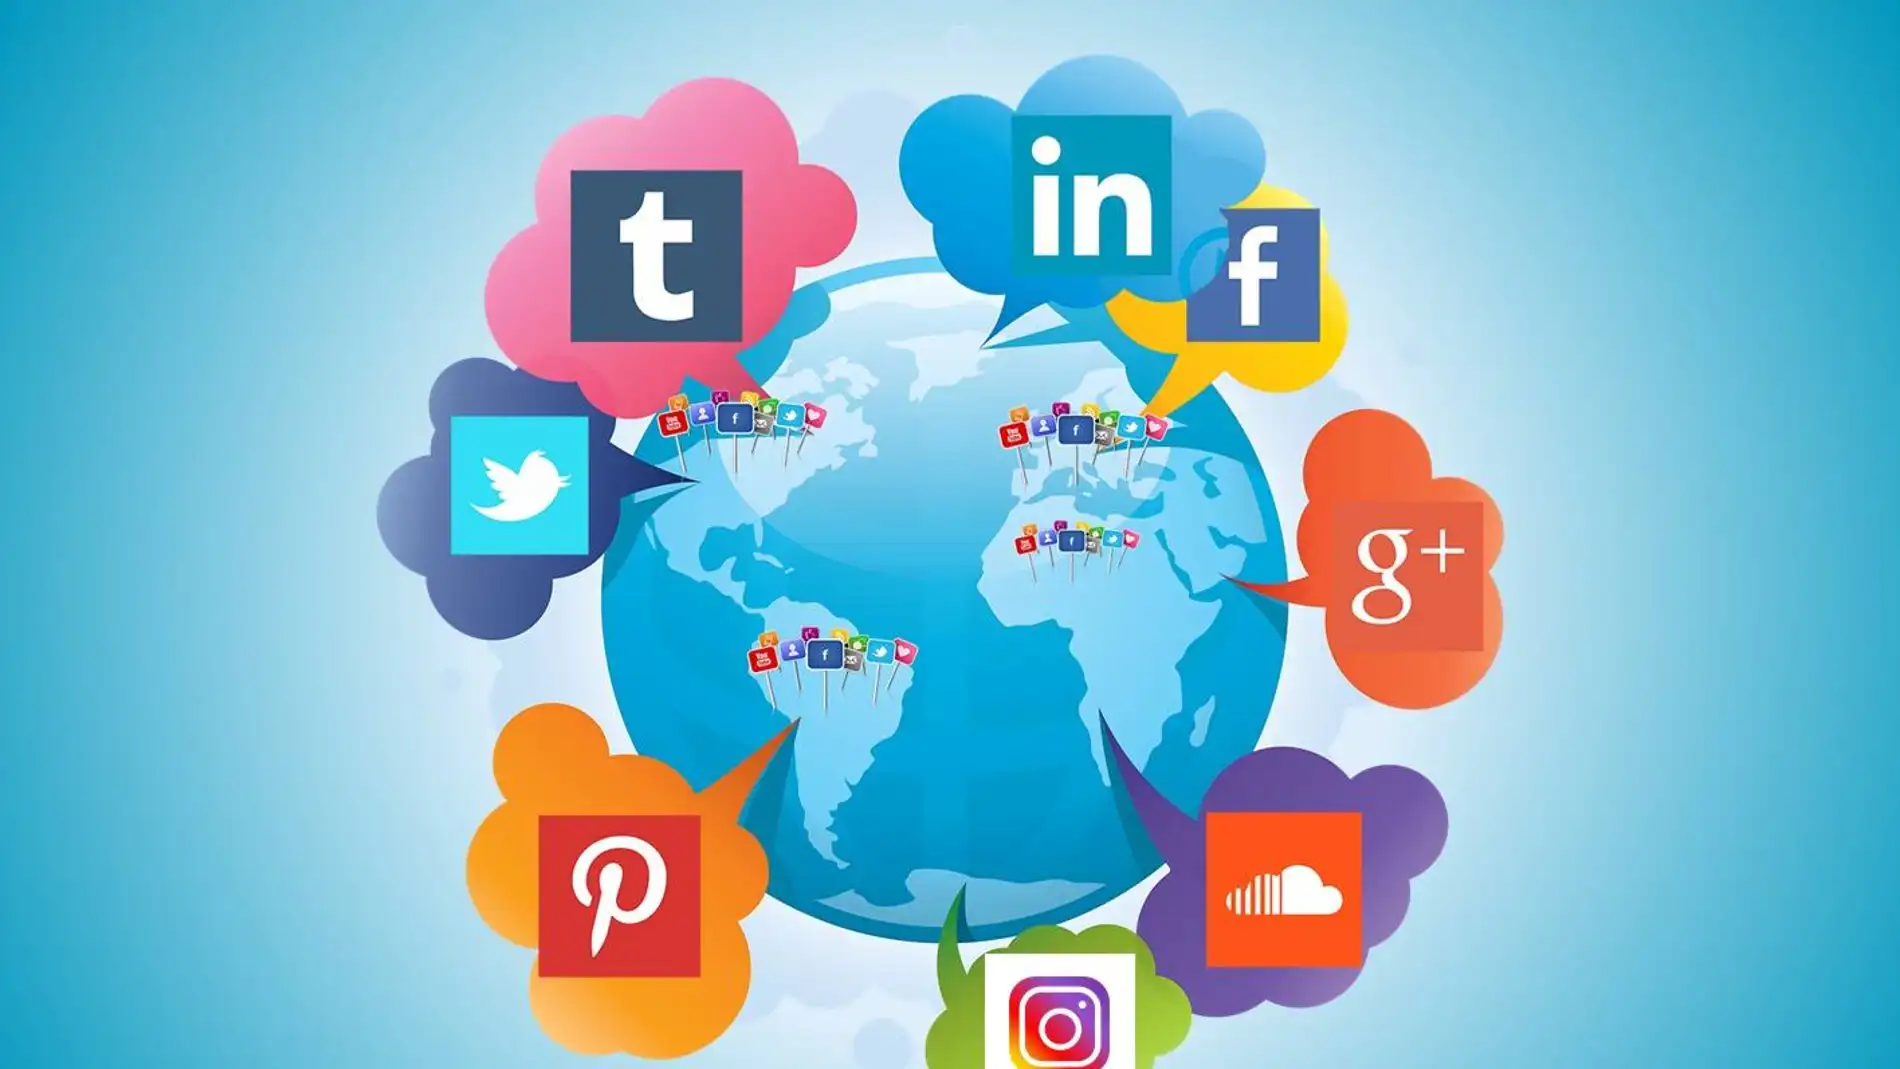 Why use social networks in my business?